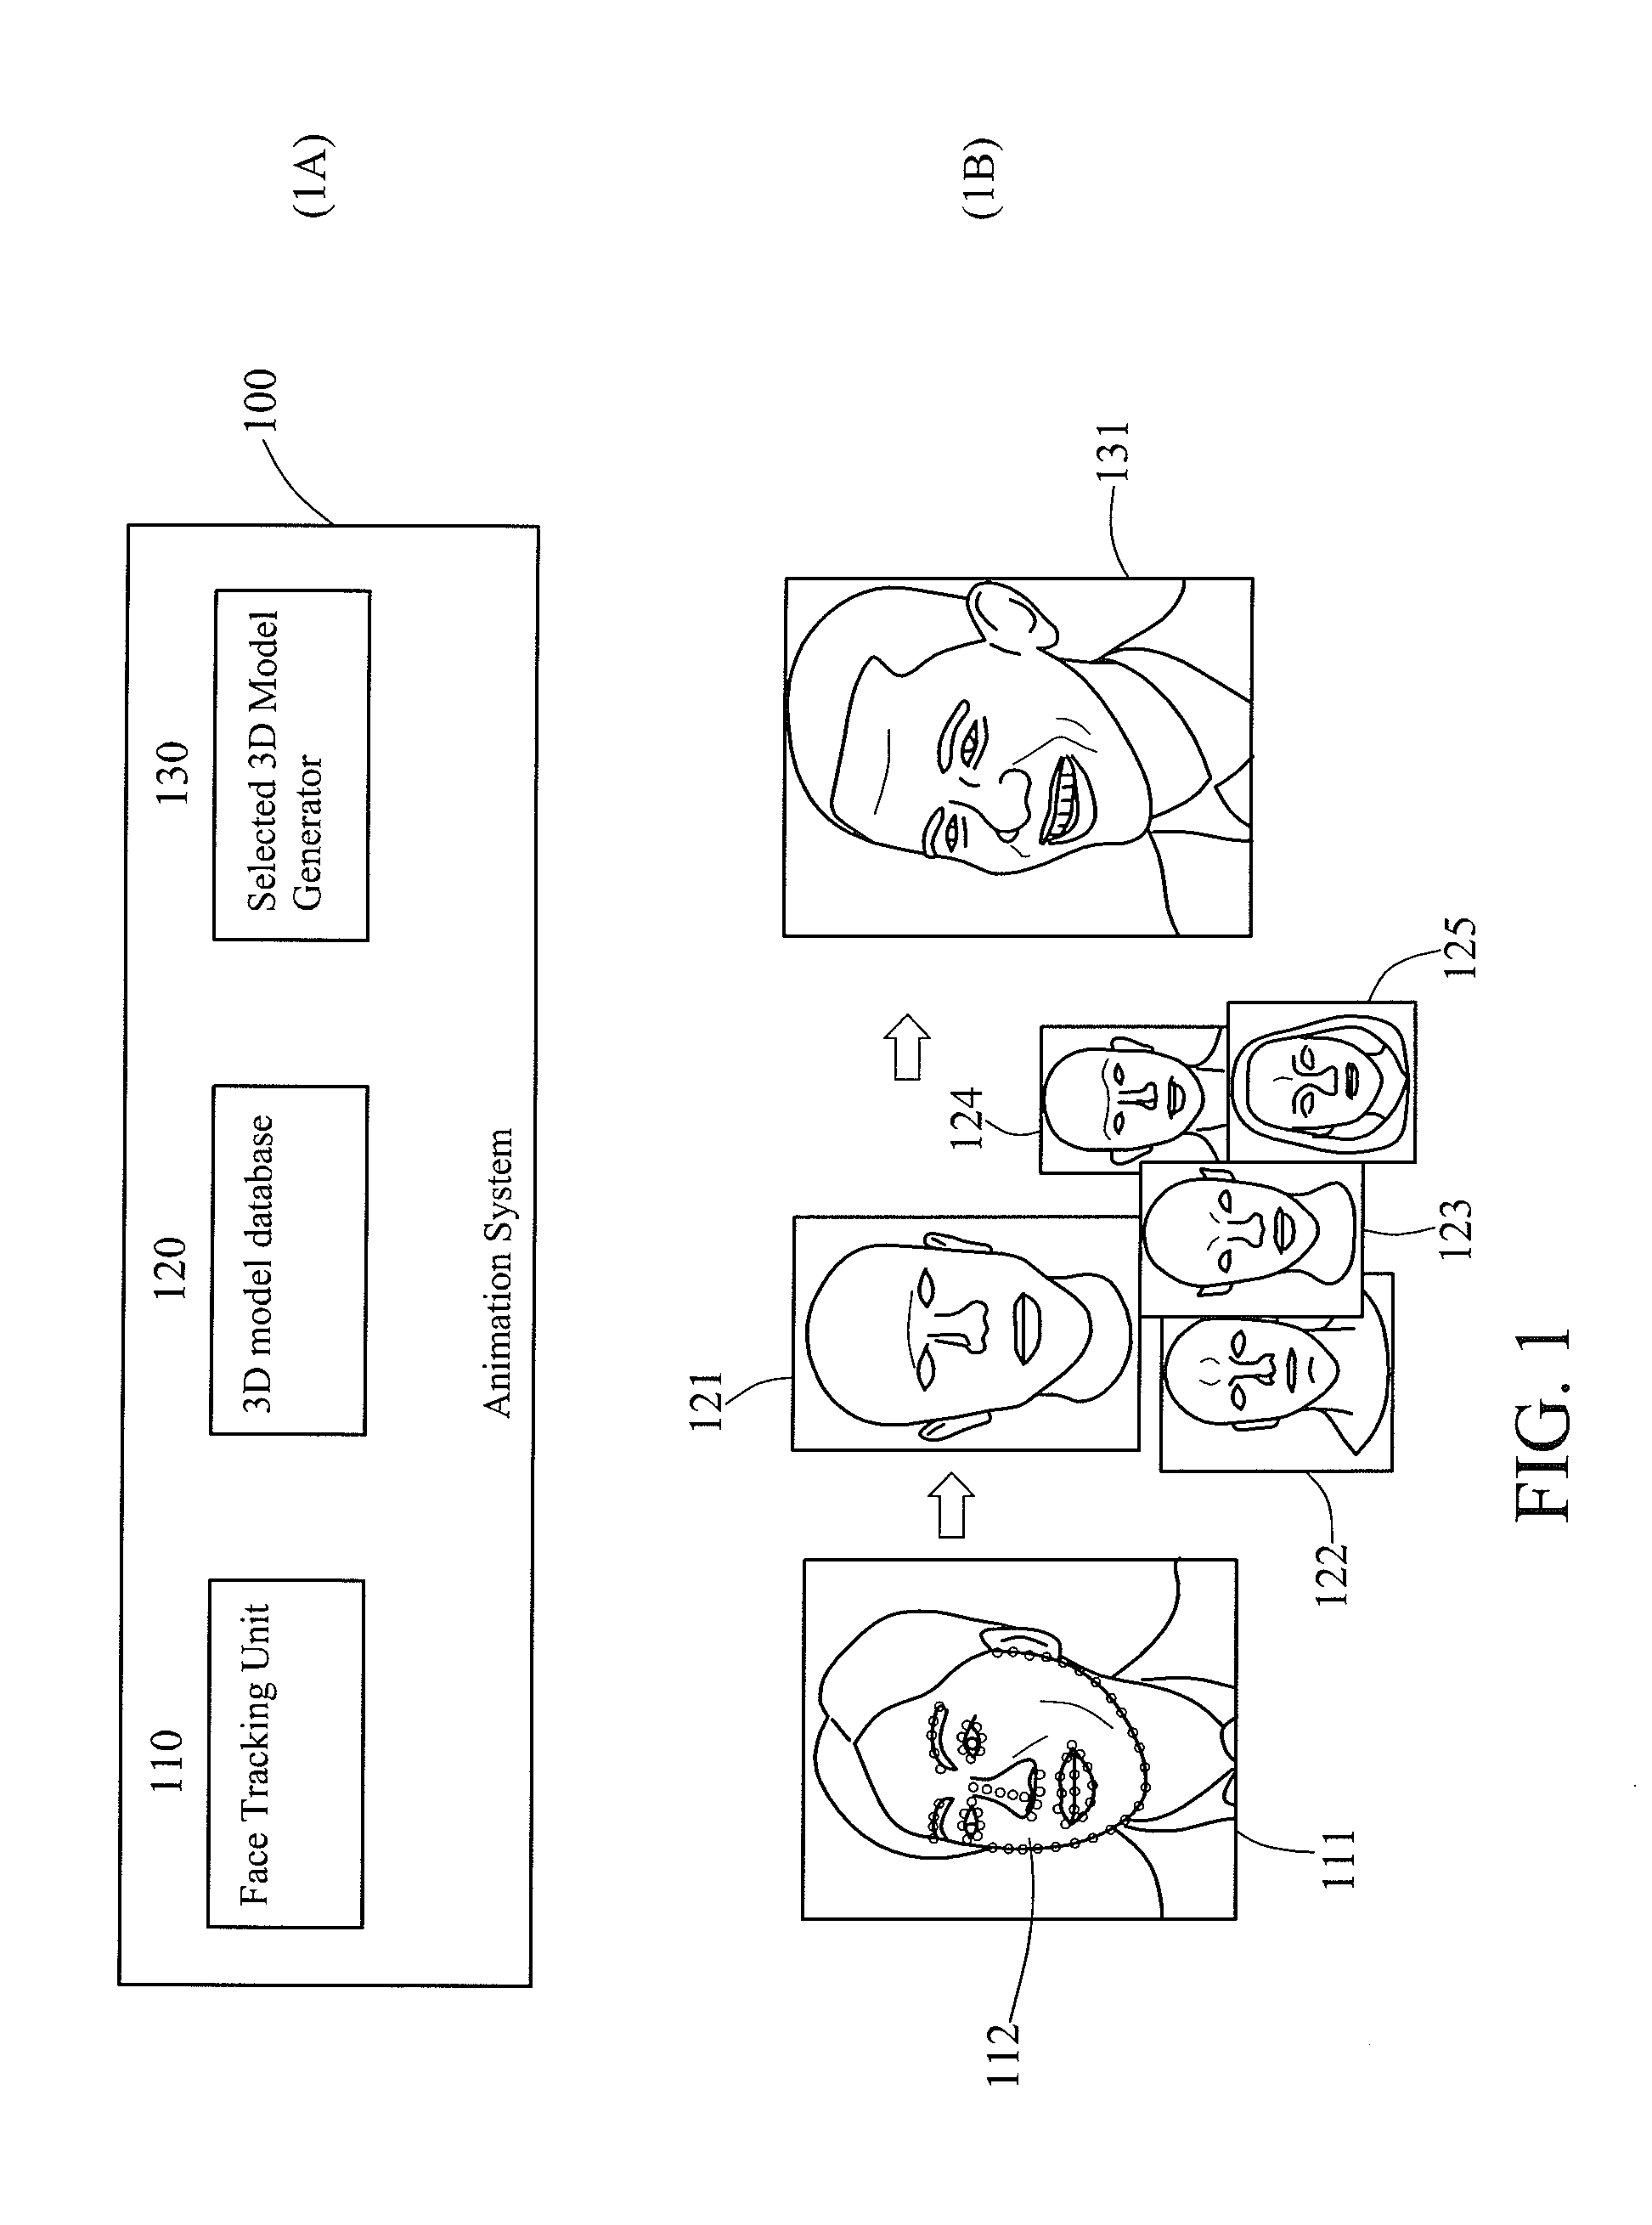 Methods for Generating Personalized 3D Models Using 2D Images and Generic 3D Models, and Related Personalized 3D Model Generating System